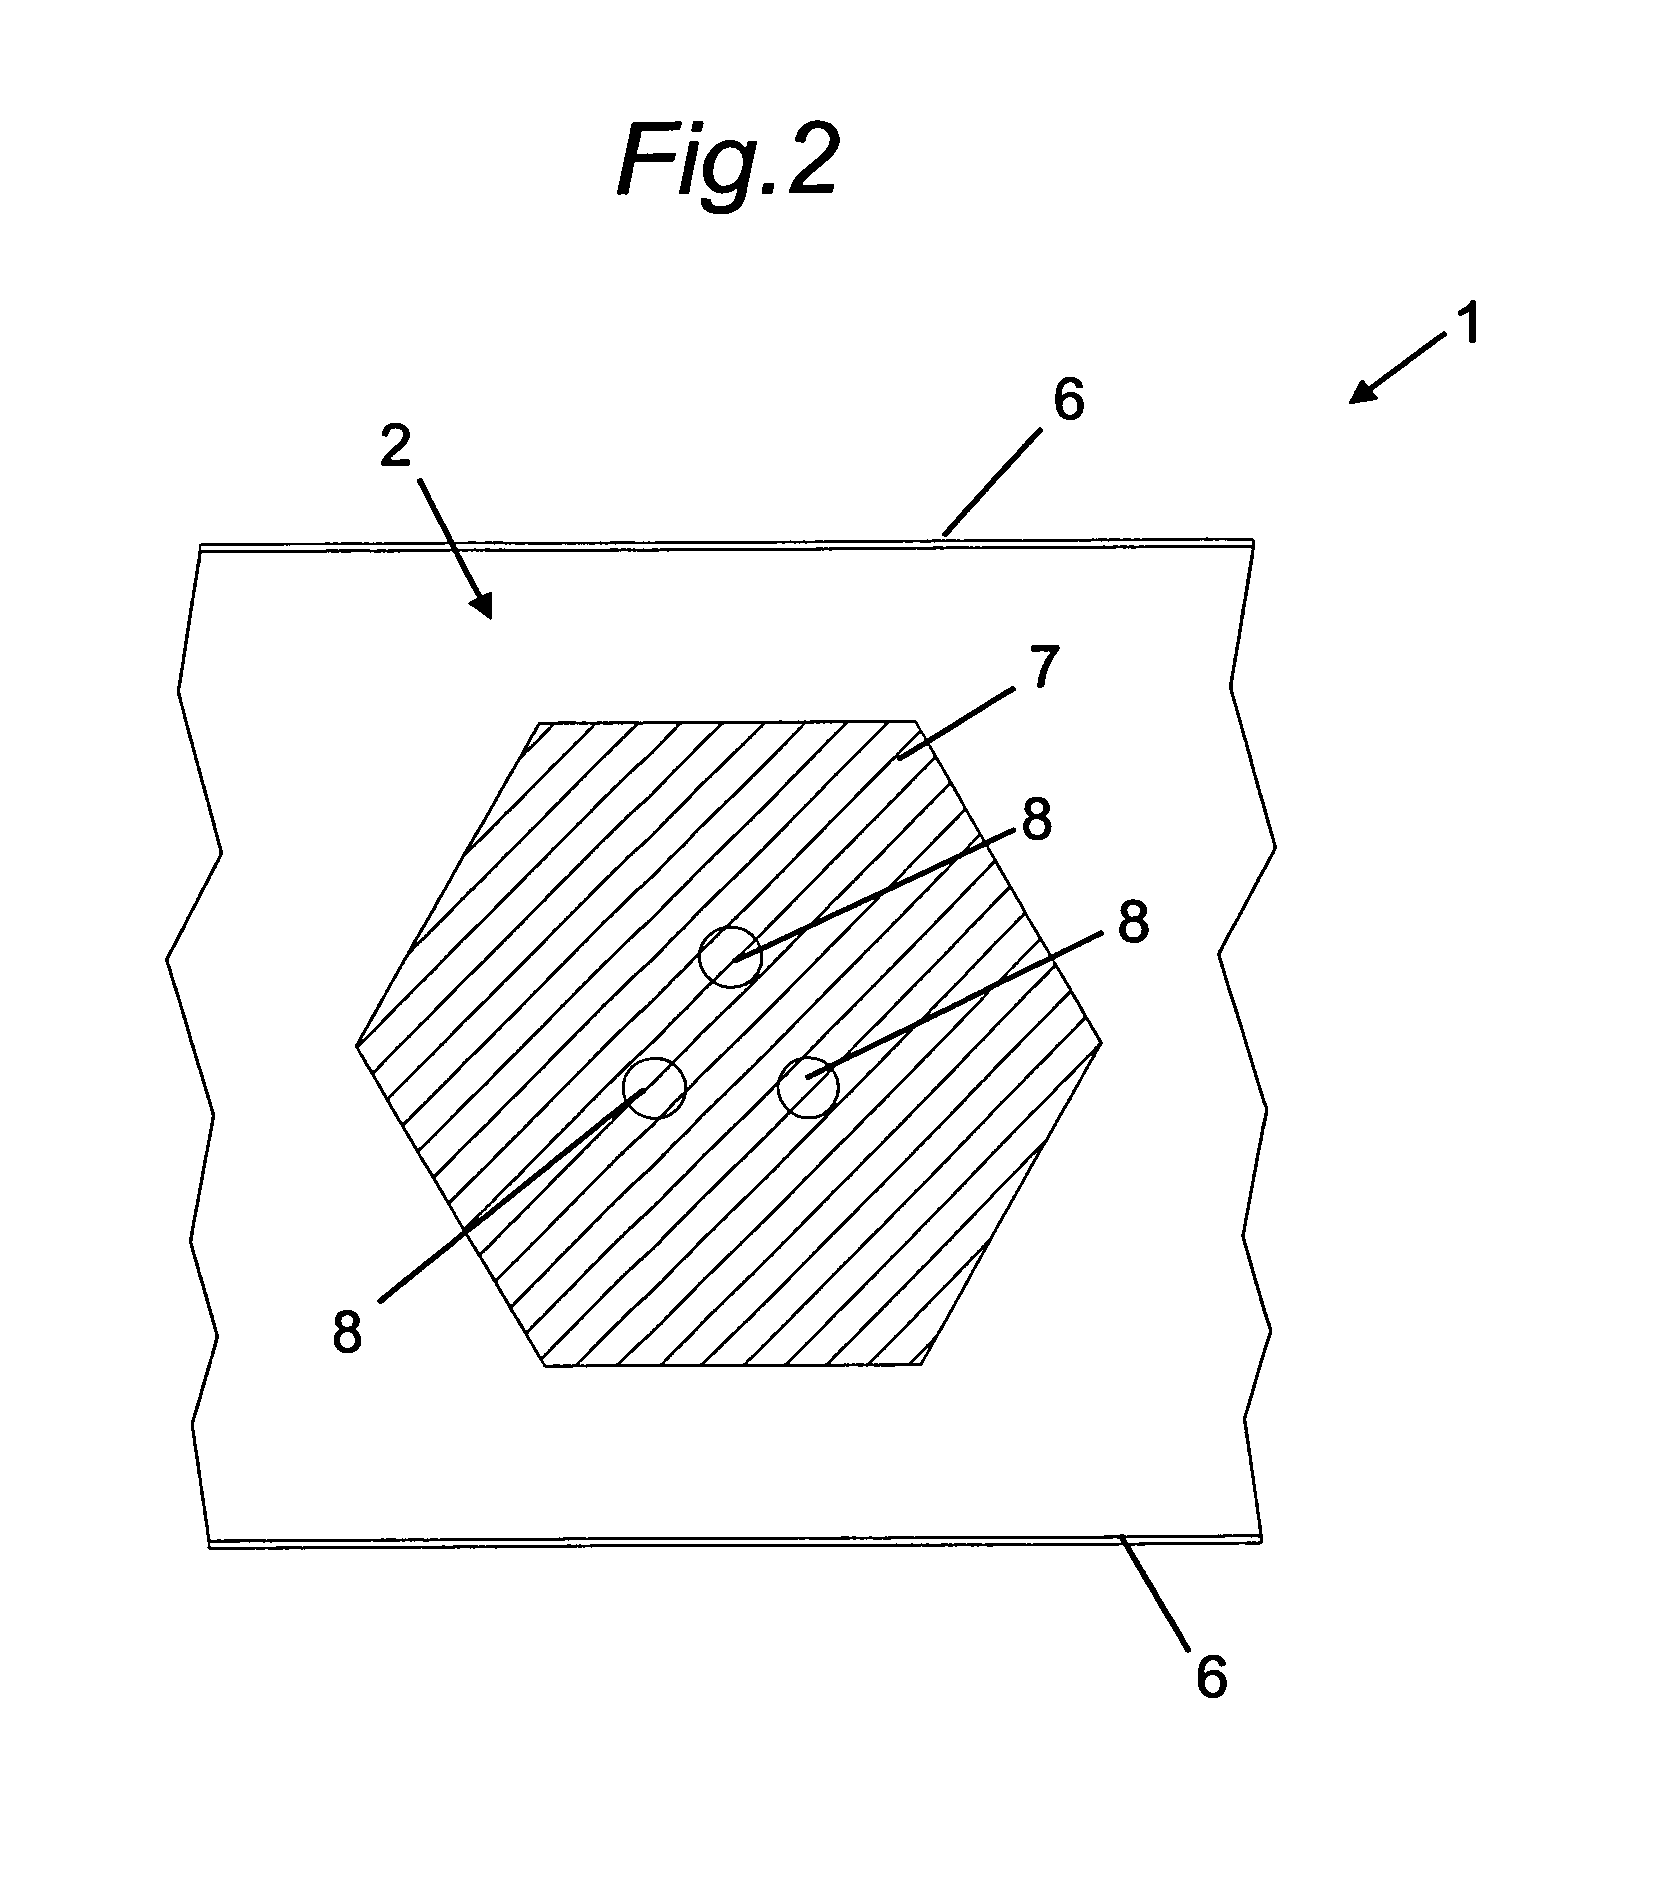 Laminated RF device with vertical resonators having stack arrangement of laminated layers including dielectric layers